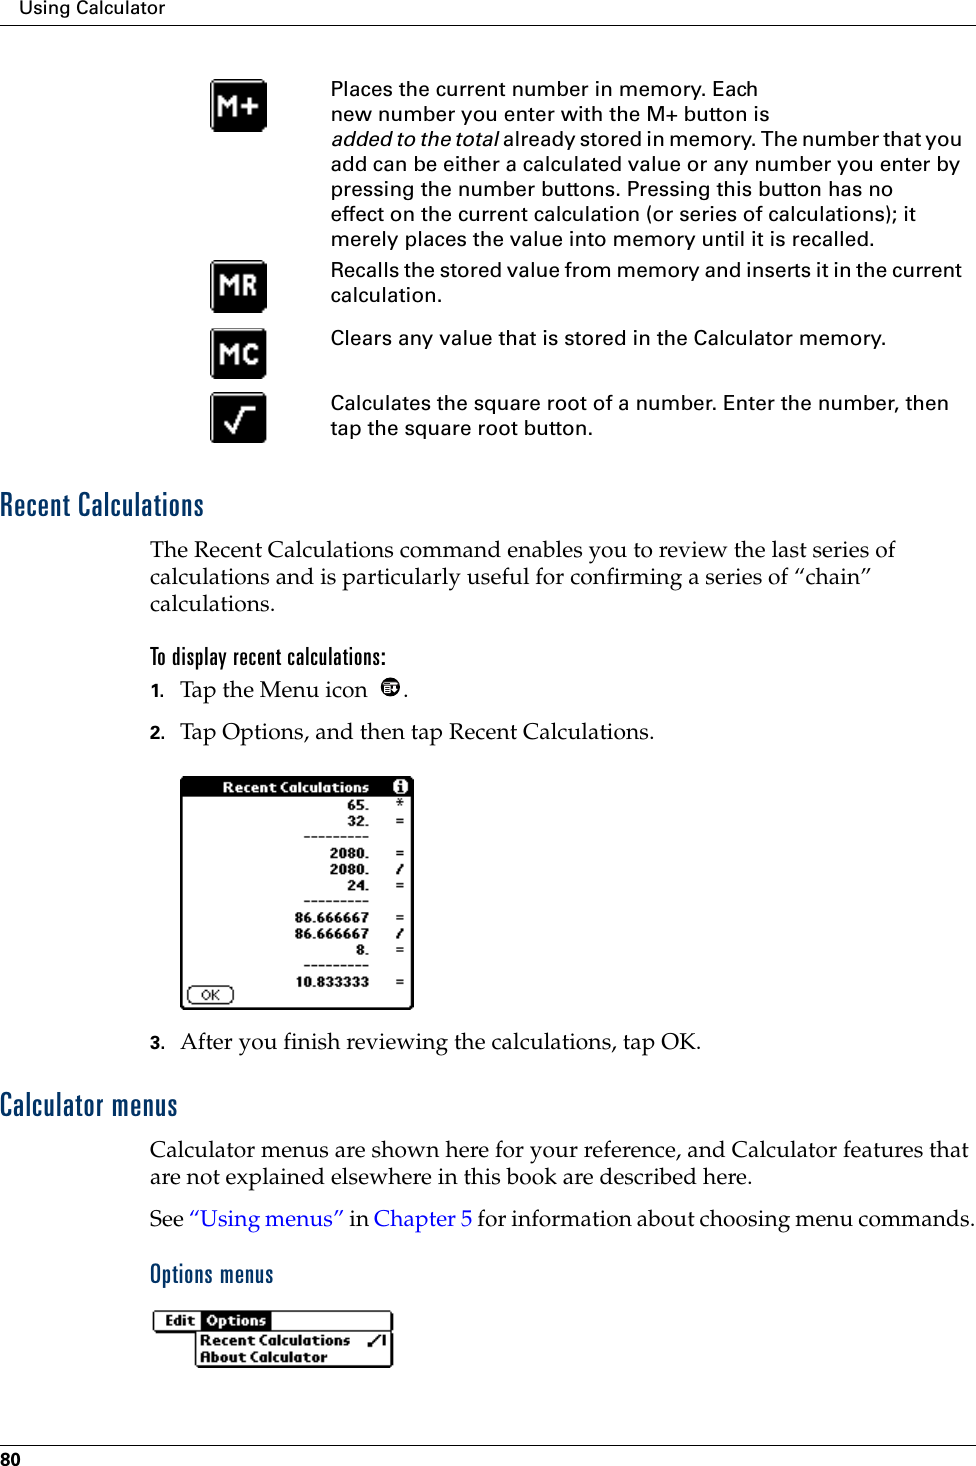 Using Calculator80Recent CalculationsThe Recent Calculations command enables you to review the last series of calculations and is particularly useful for confirming a series of “chain” calculations.To display recent calculations:1. Tap the Menu icon  .2. Tap Options, and then tap Recent Calculations.3. After you finish reviewing the calculations, tap OK.Calculator menusCalculator menus are shown here for your reference, and Calculator features that are not explained elsewhere in this book are described here.See “Using menus” in Chapter 5 for information about choosing menu commands.Options menusPlaces the current number in memory. Each new number you enter with the M+ button is added to the total already stored in memory. The number that you add can be either a calculated value or any number you enter by pressing the number buttons. Pressing this button has no effect on the current calculation (or series of calculations); it merely places the value into memory until it is recalled.Recalls the stored value from memory and inserts it in the current calculation.Clears any value that is stored in the Calculator memory.Calculates the square root of a number. Enter the number, then tap the square root button.